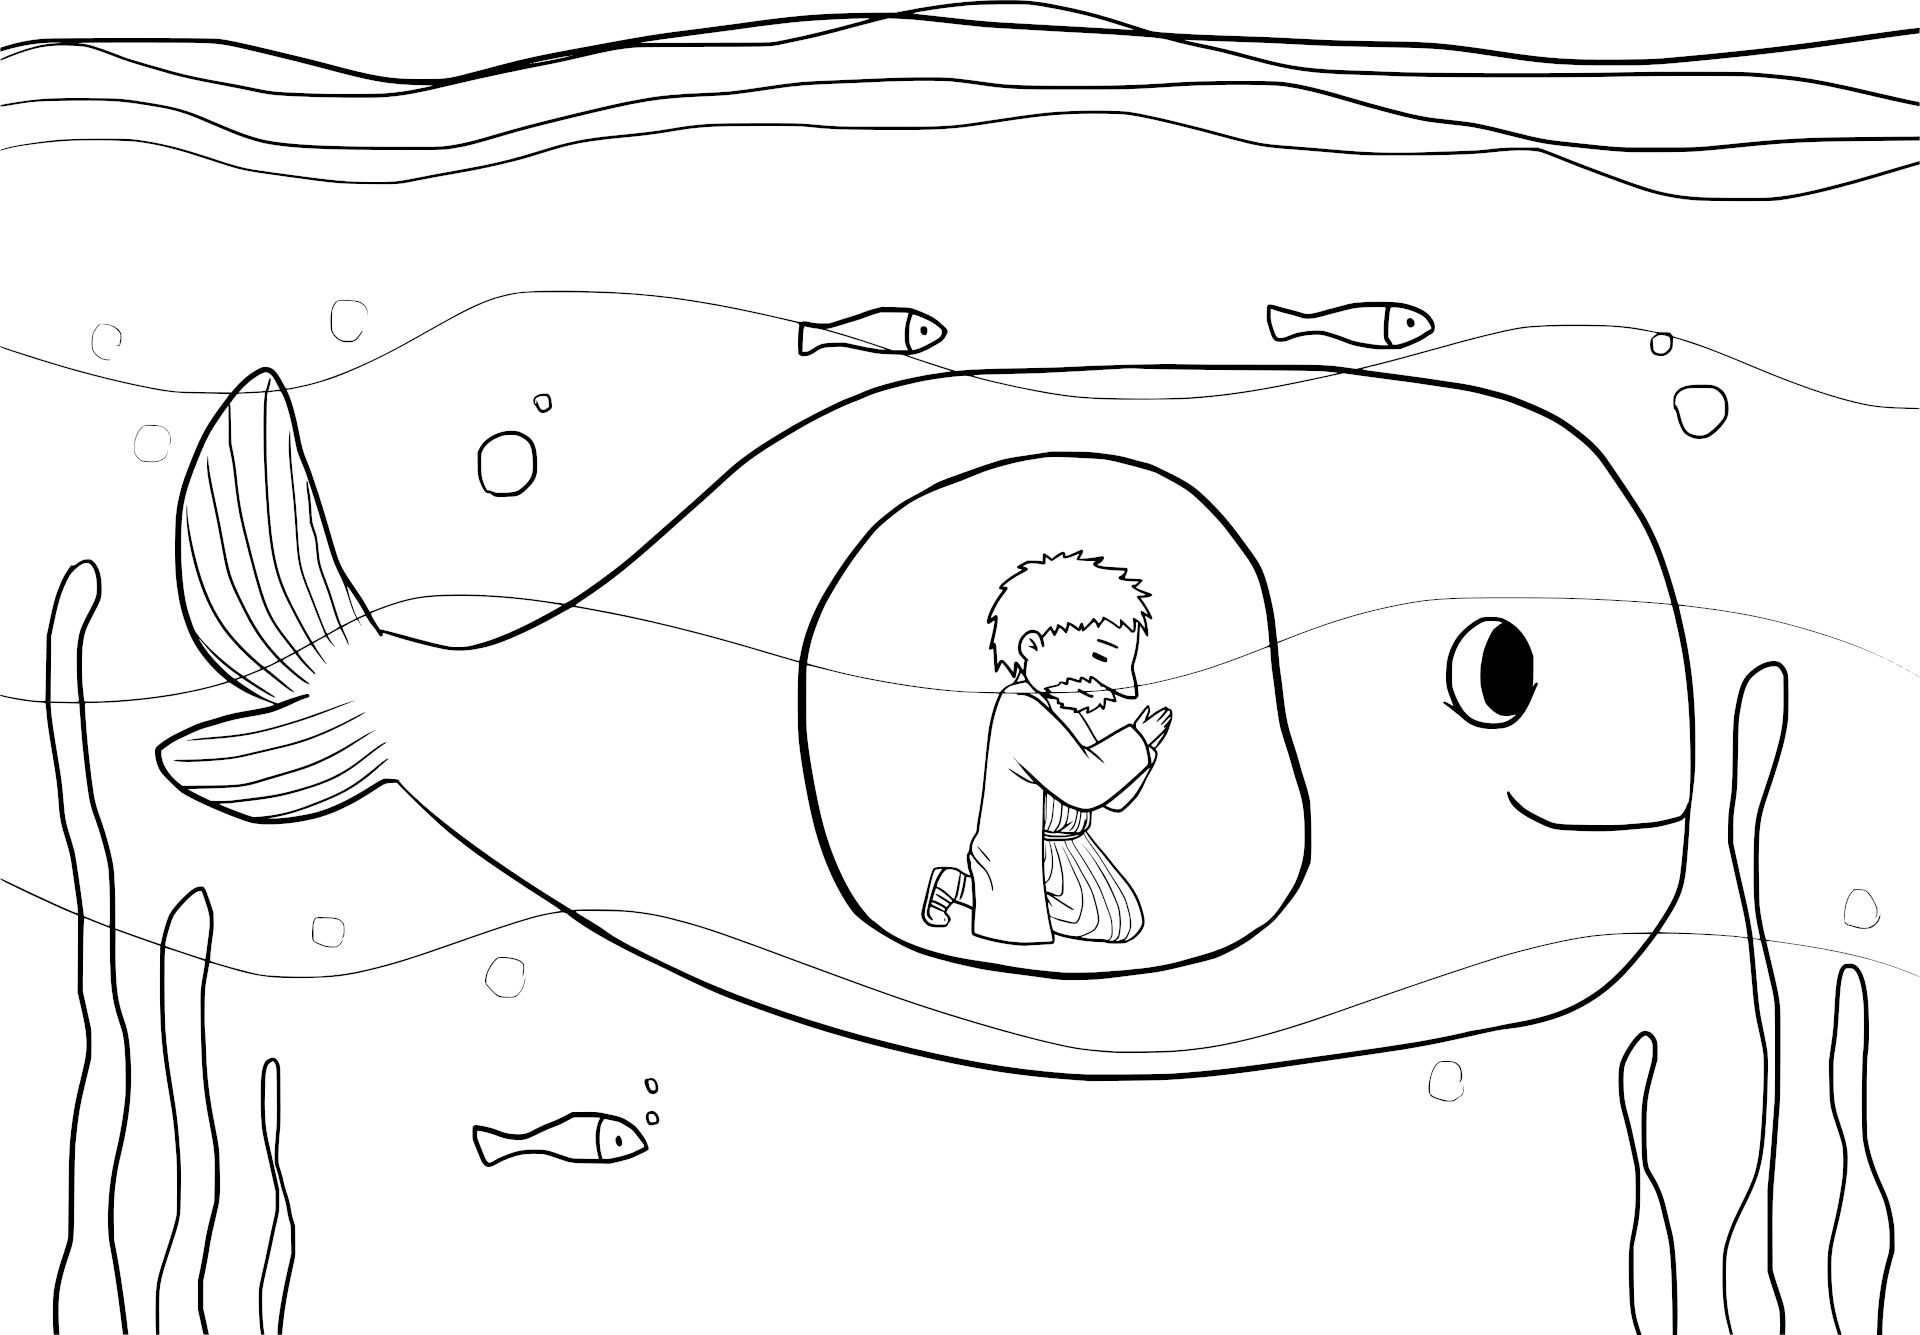 Jonah and the Whale coloring page